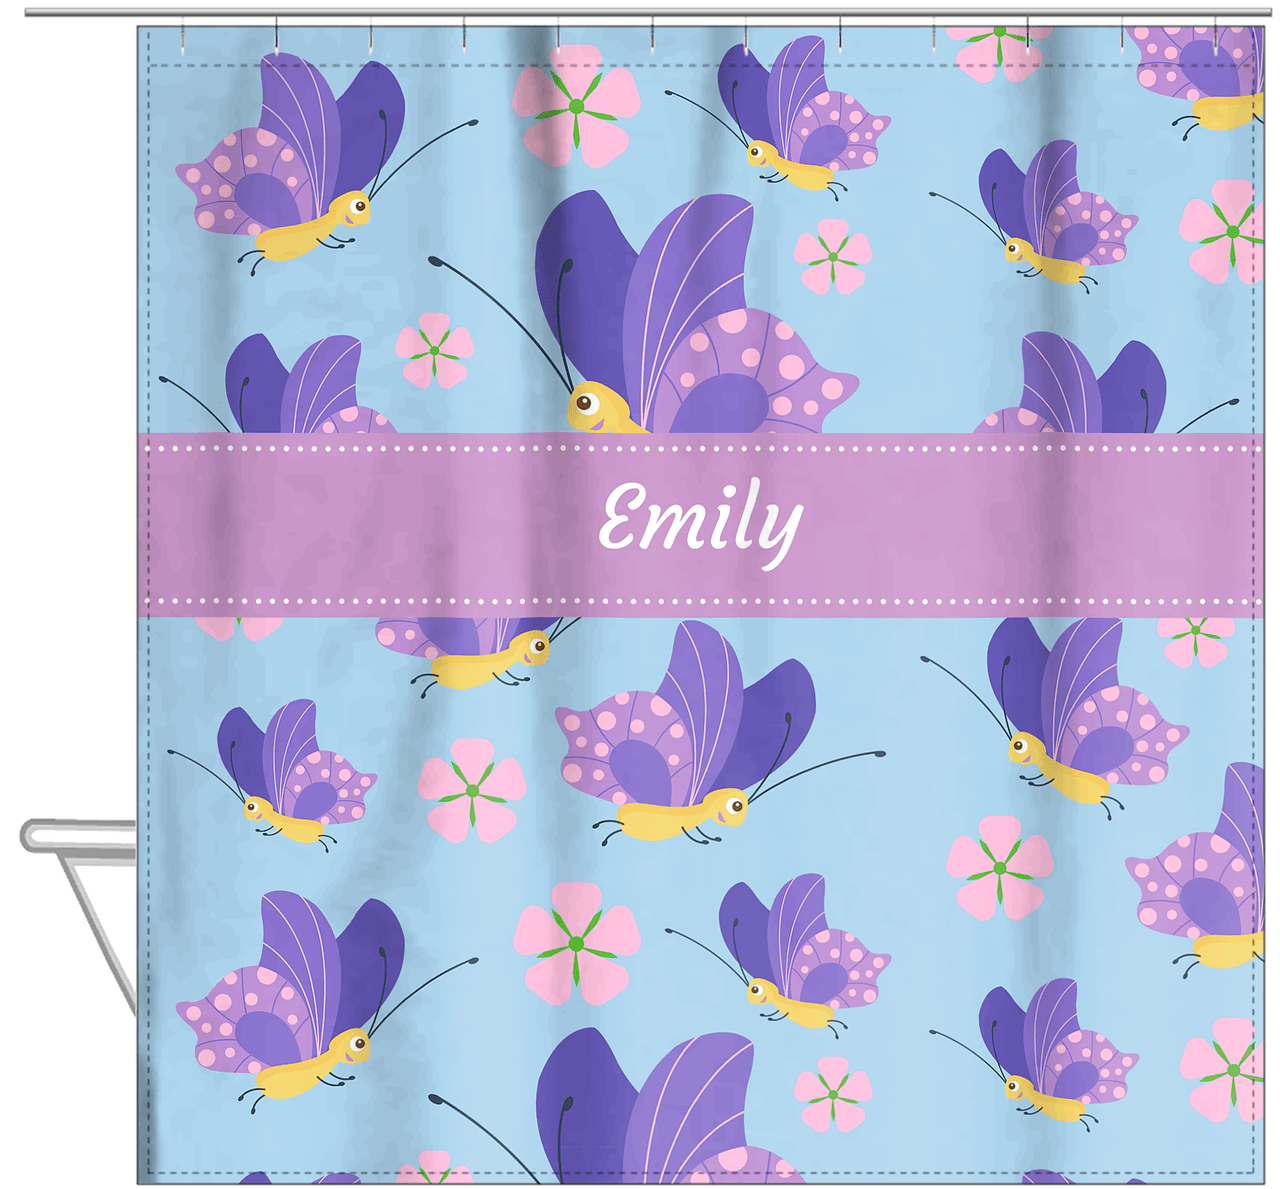 Personalized Butterfly Shower Curtain I - Blue Background - Purple Butterflies I - Hanging View